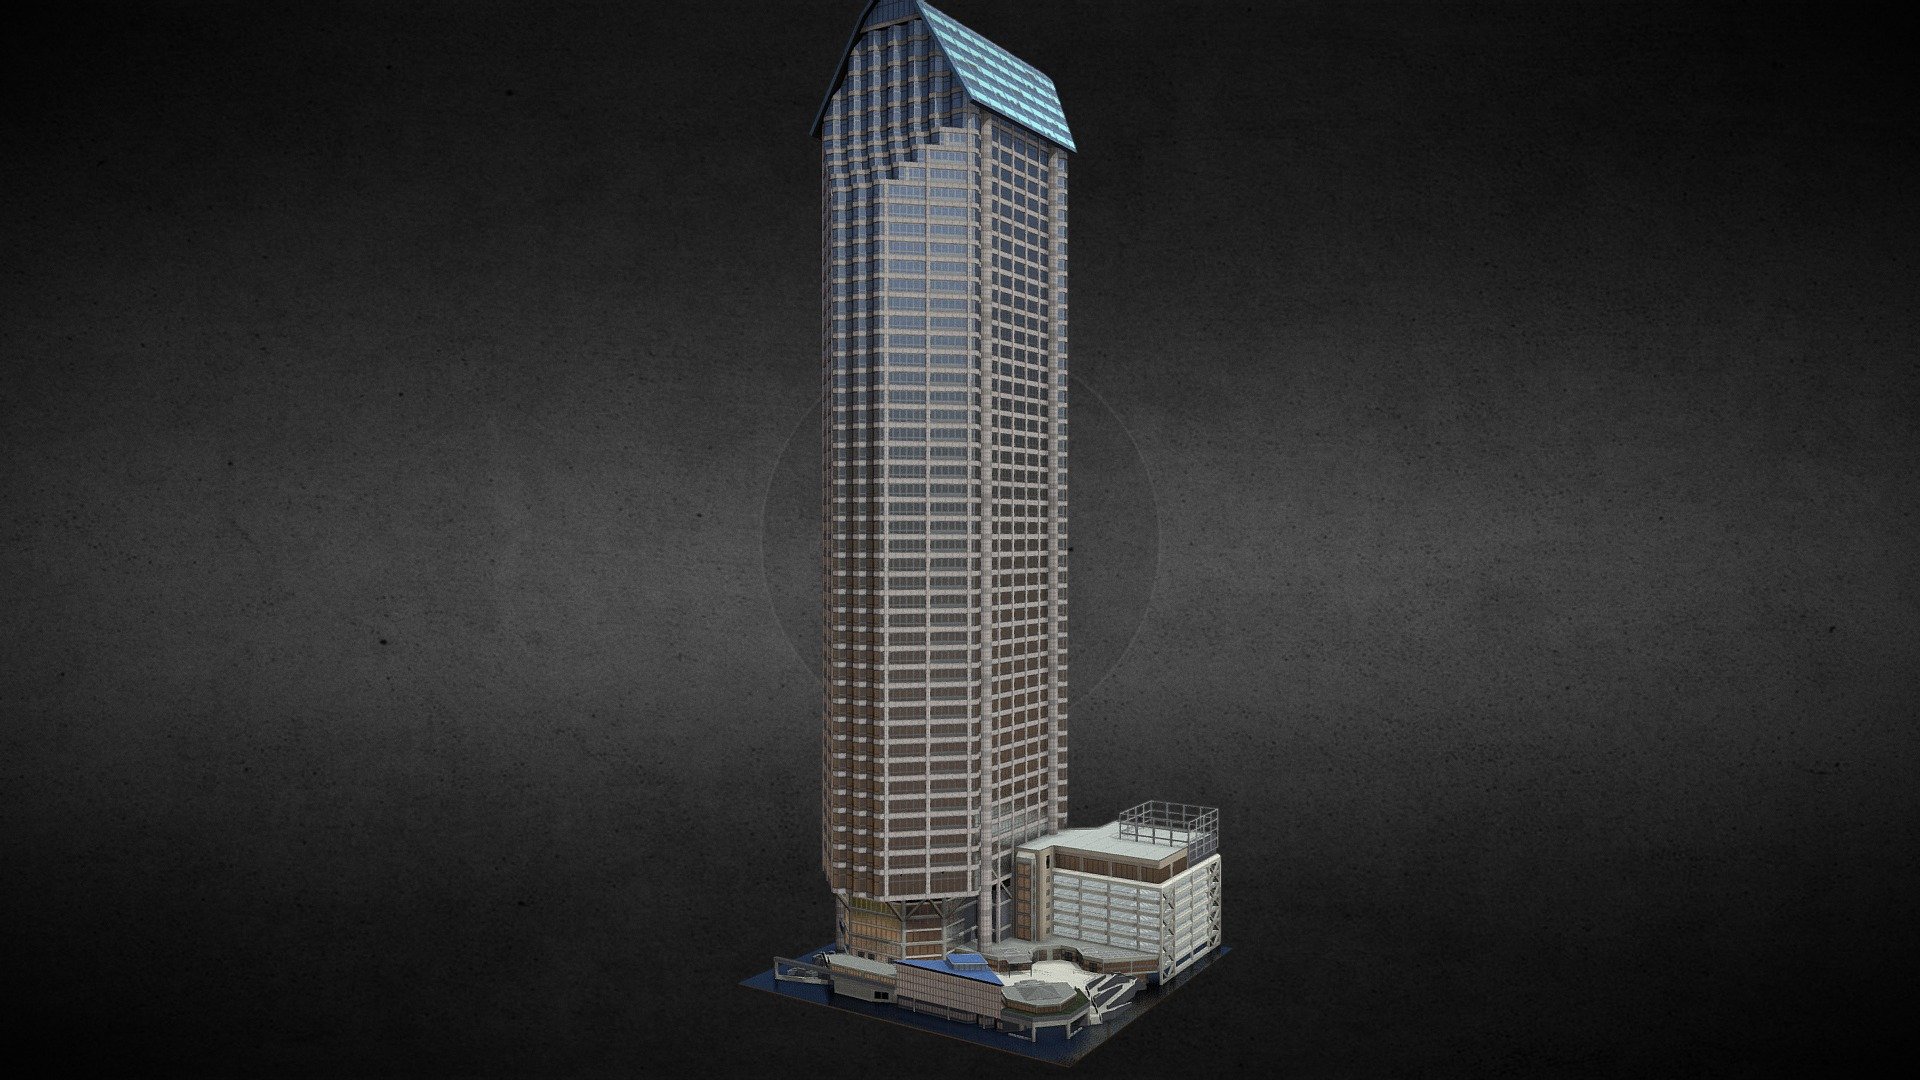 Seattle Municipal Building

Adaptation for the game &ldquo;CitiesSkyliones